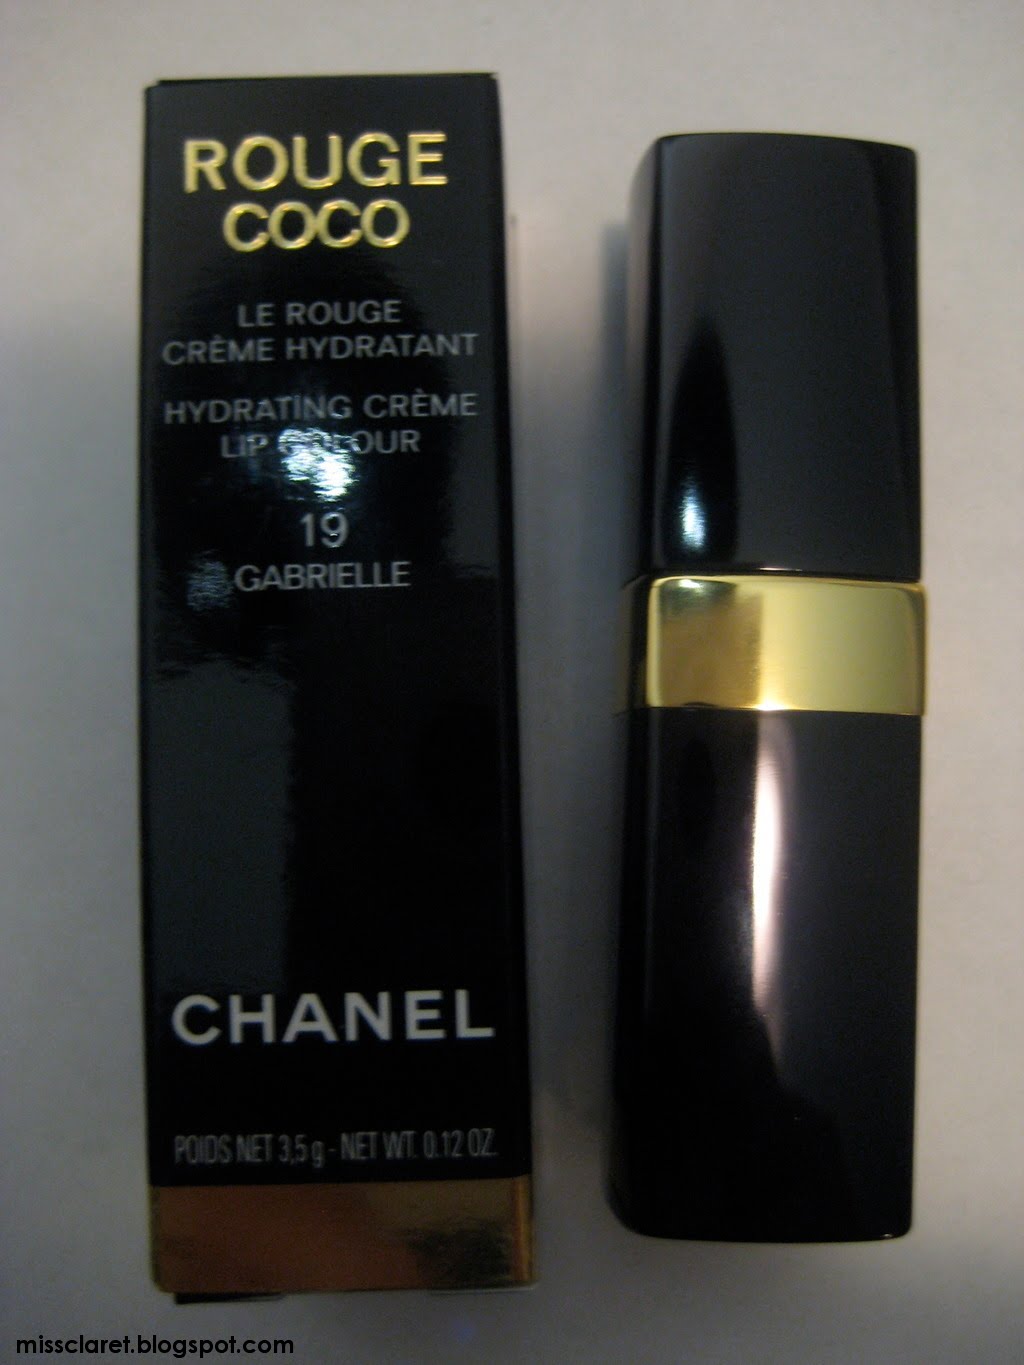 ROUGE COCO Ultra hydrating lip colour 434 - Mademoiselle - Chanel